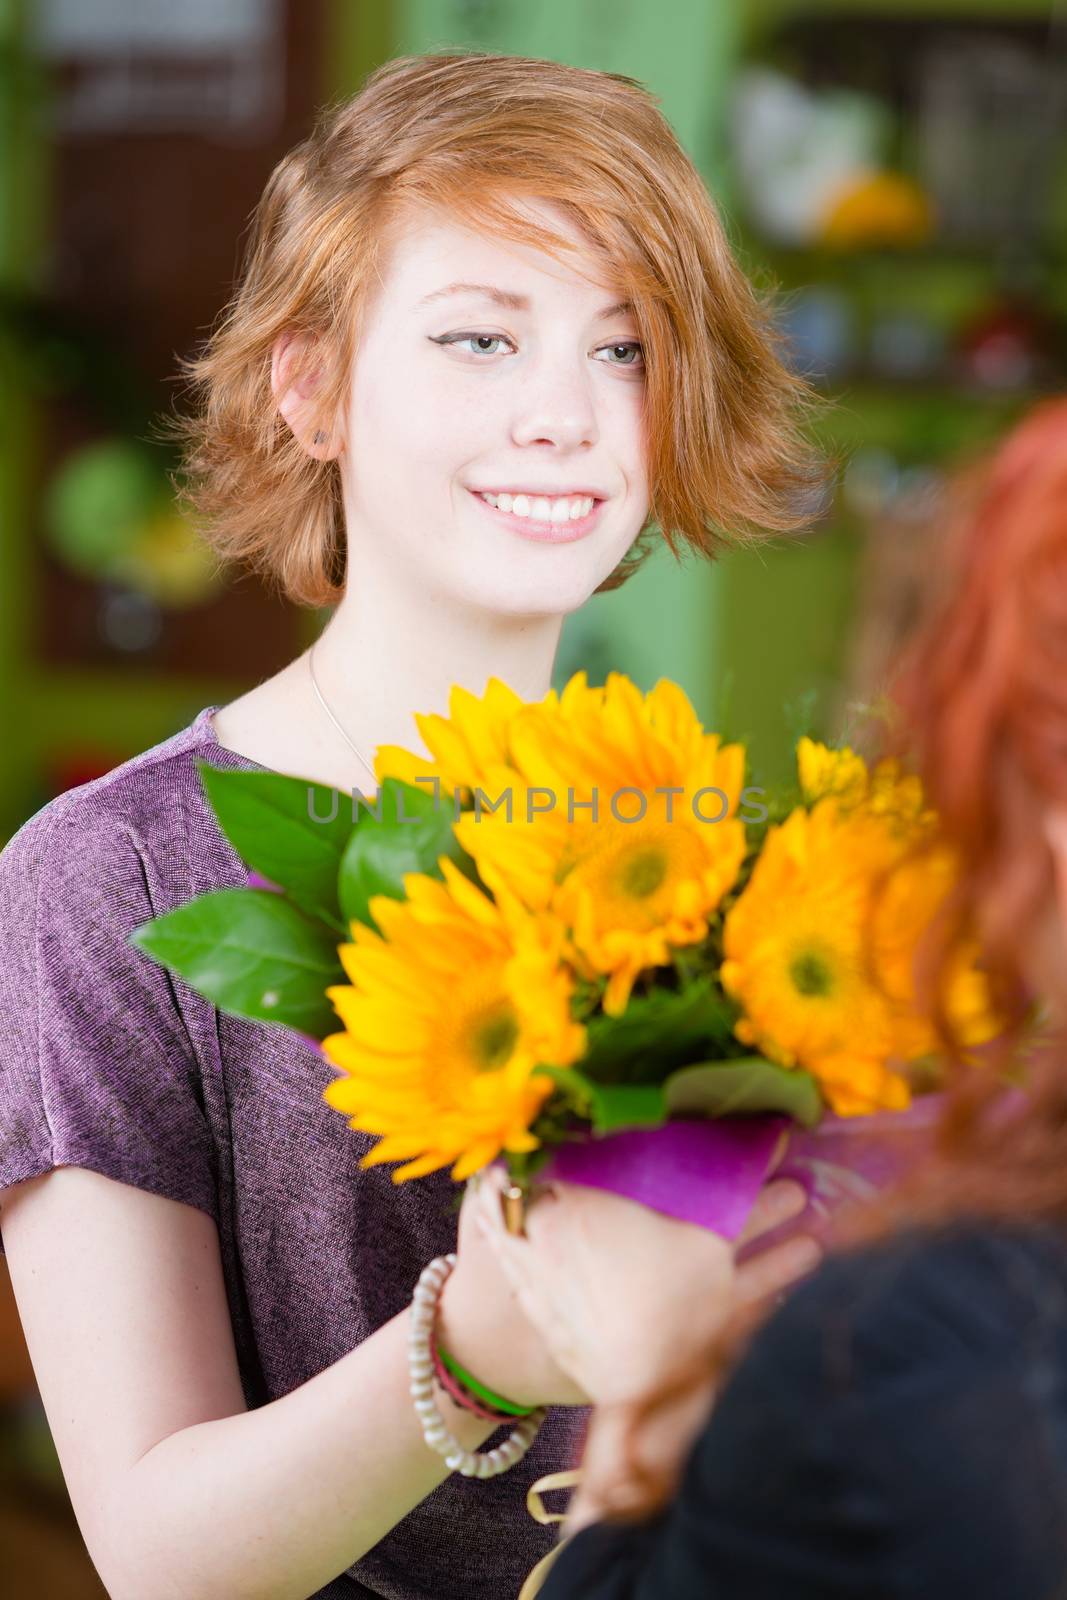 Girl in Flower Shop Purchases Sunflowers by Creatista